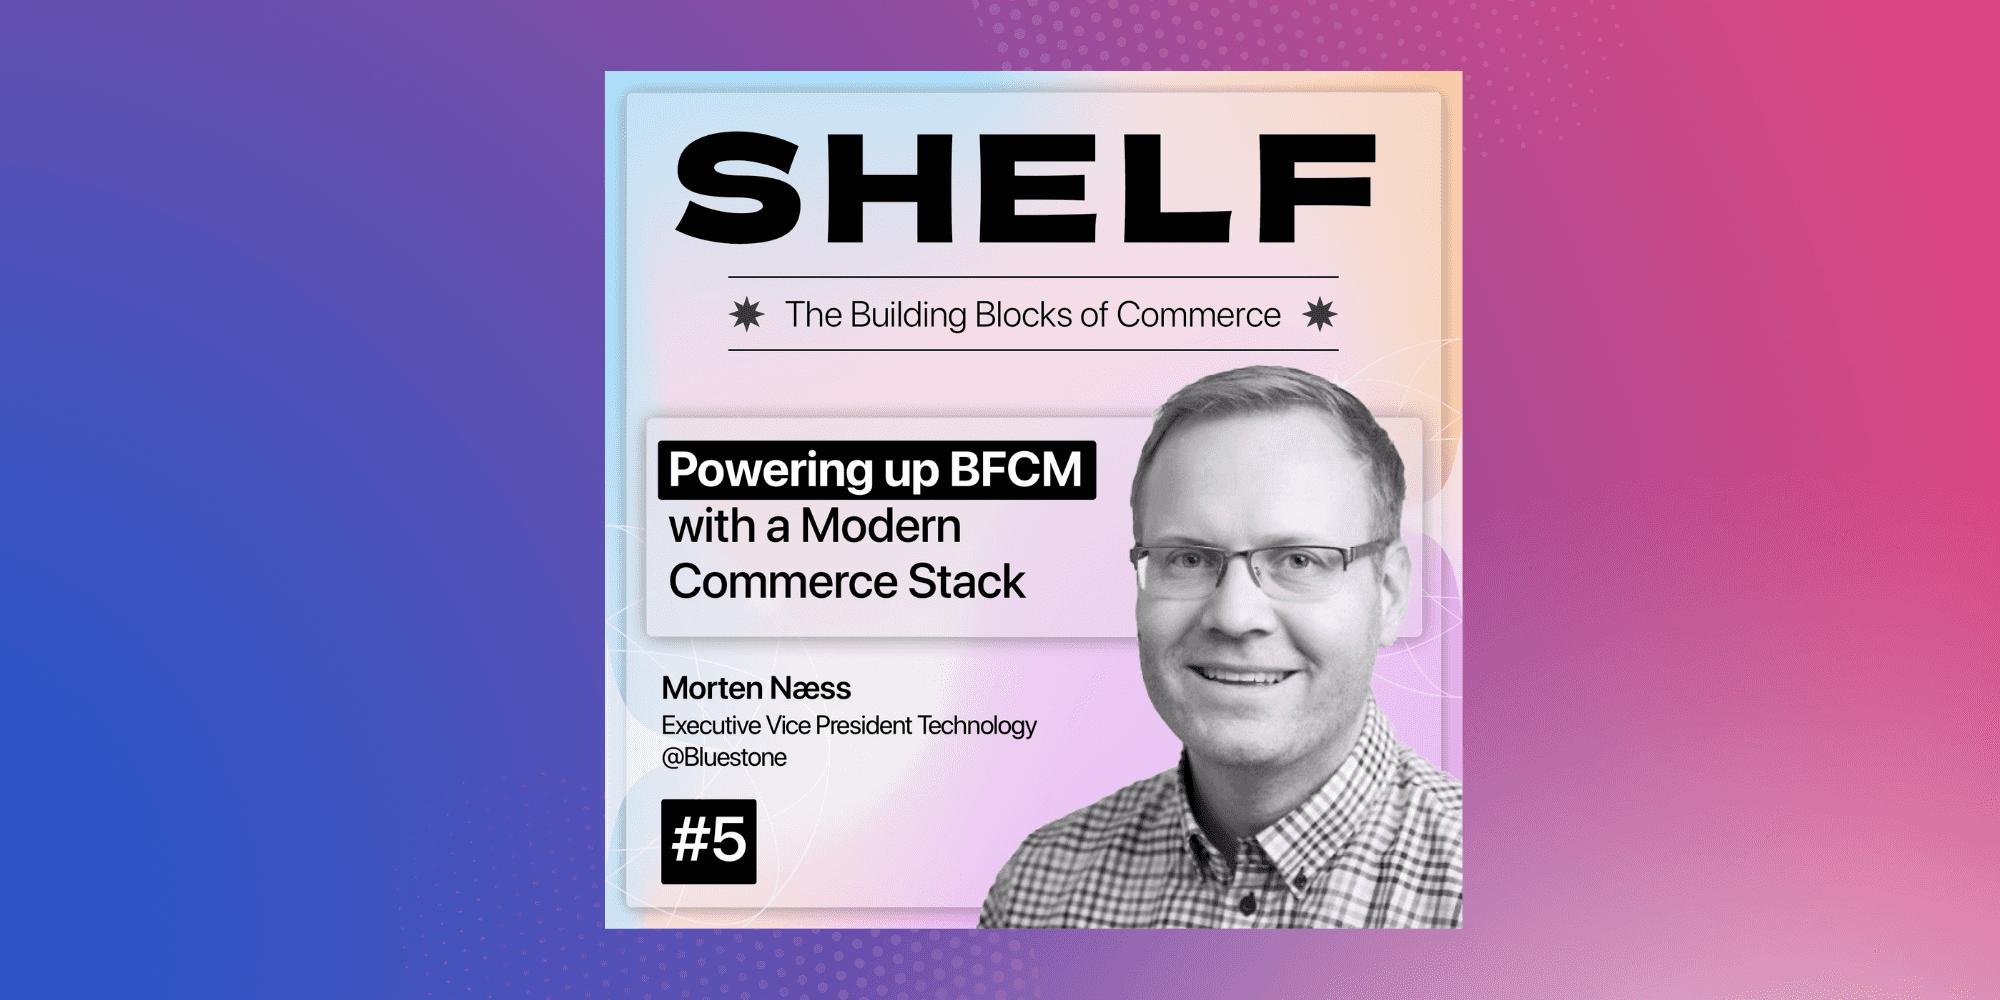 shelf-powering-bfcm-with-a-modern-commerce-stack